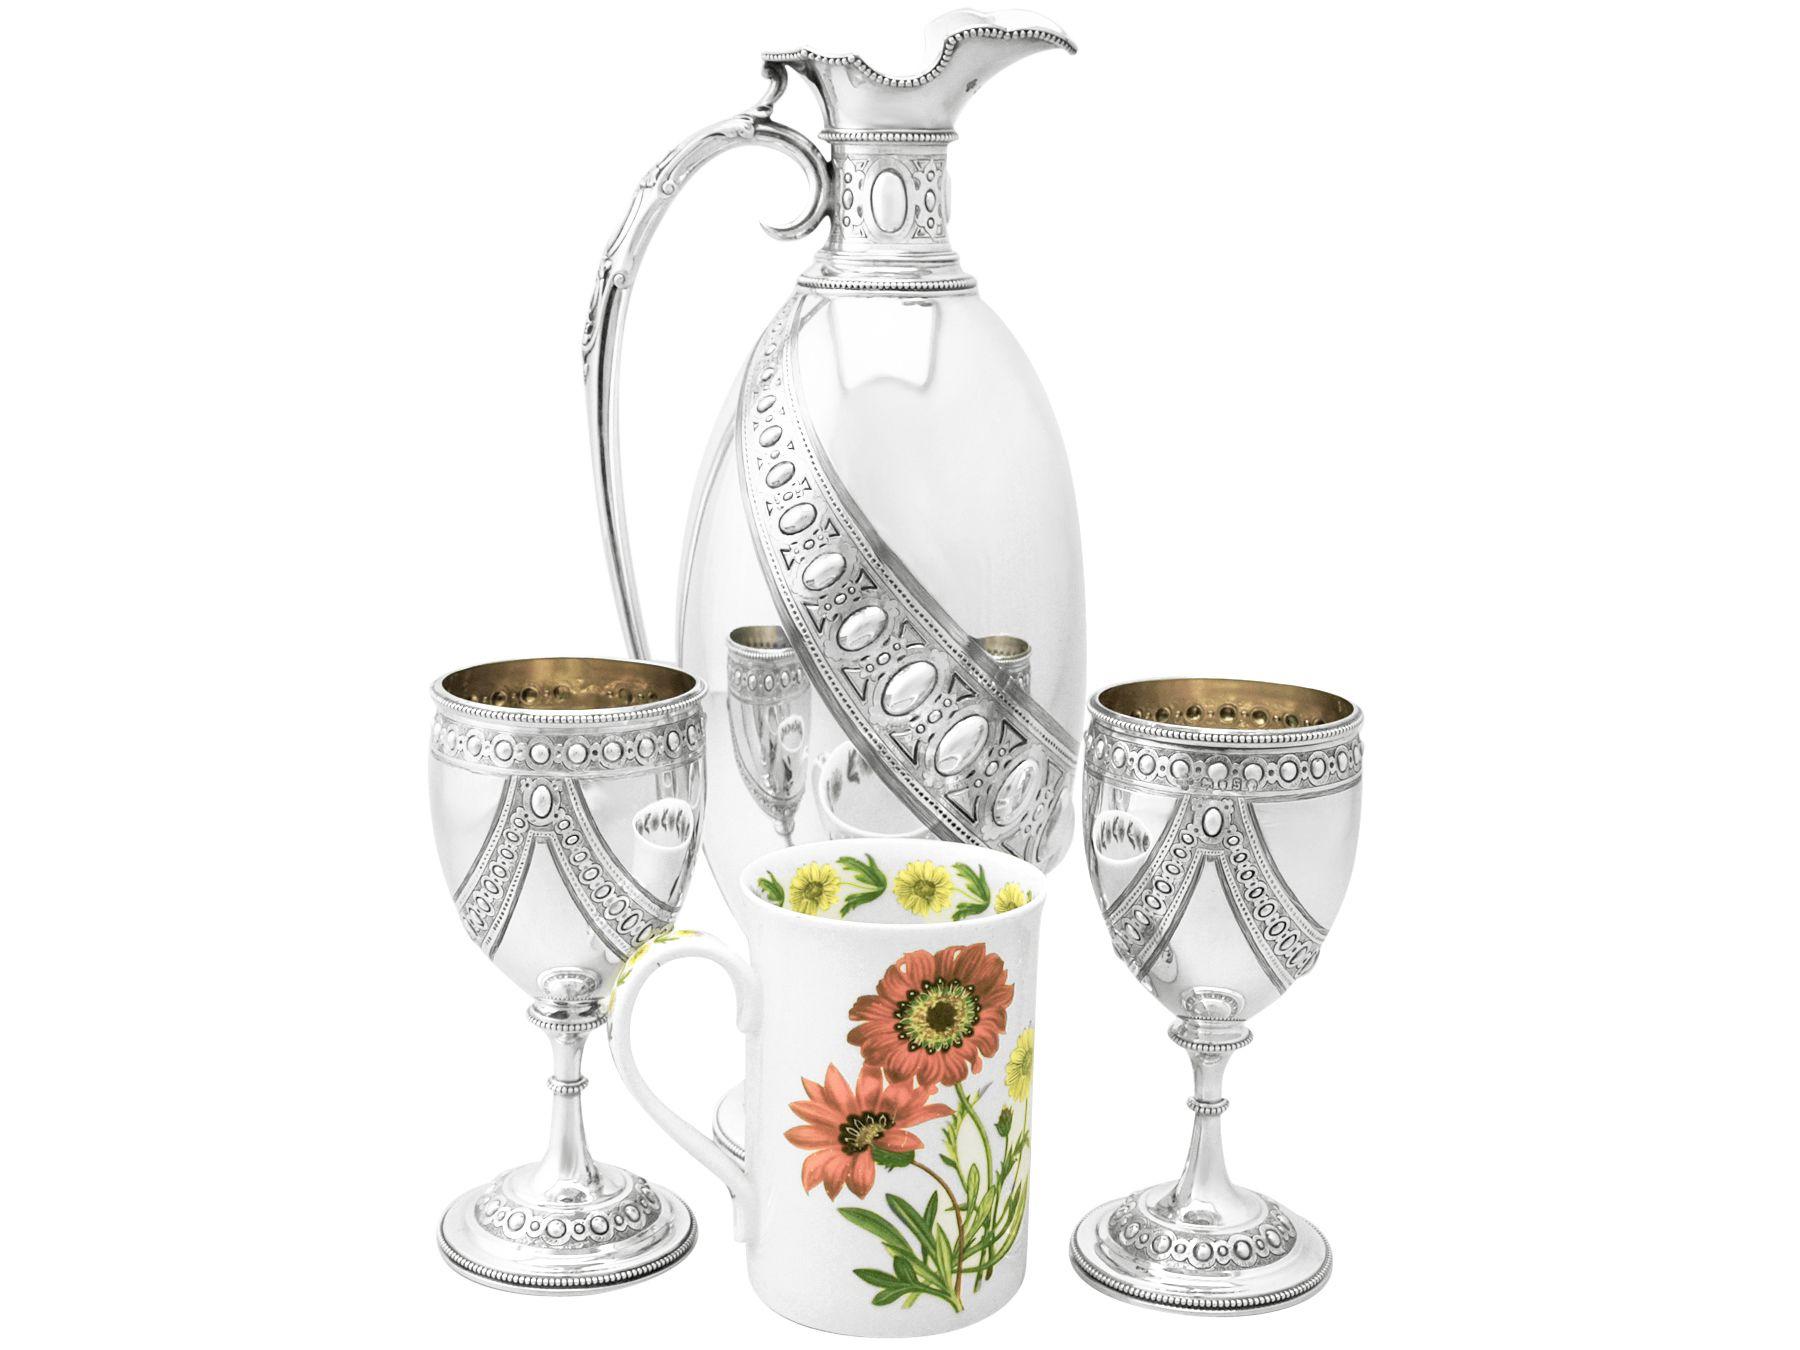 An exceptional, fine and impressive antique Victorian English sterling silver claret jug with matching goblets made by Barnard & Sons Ltd, an addition to our range of collectable silverware

This exceptional Victorian sterling silver set consists